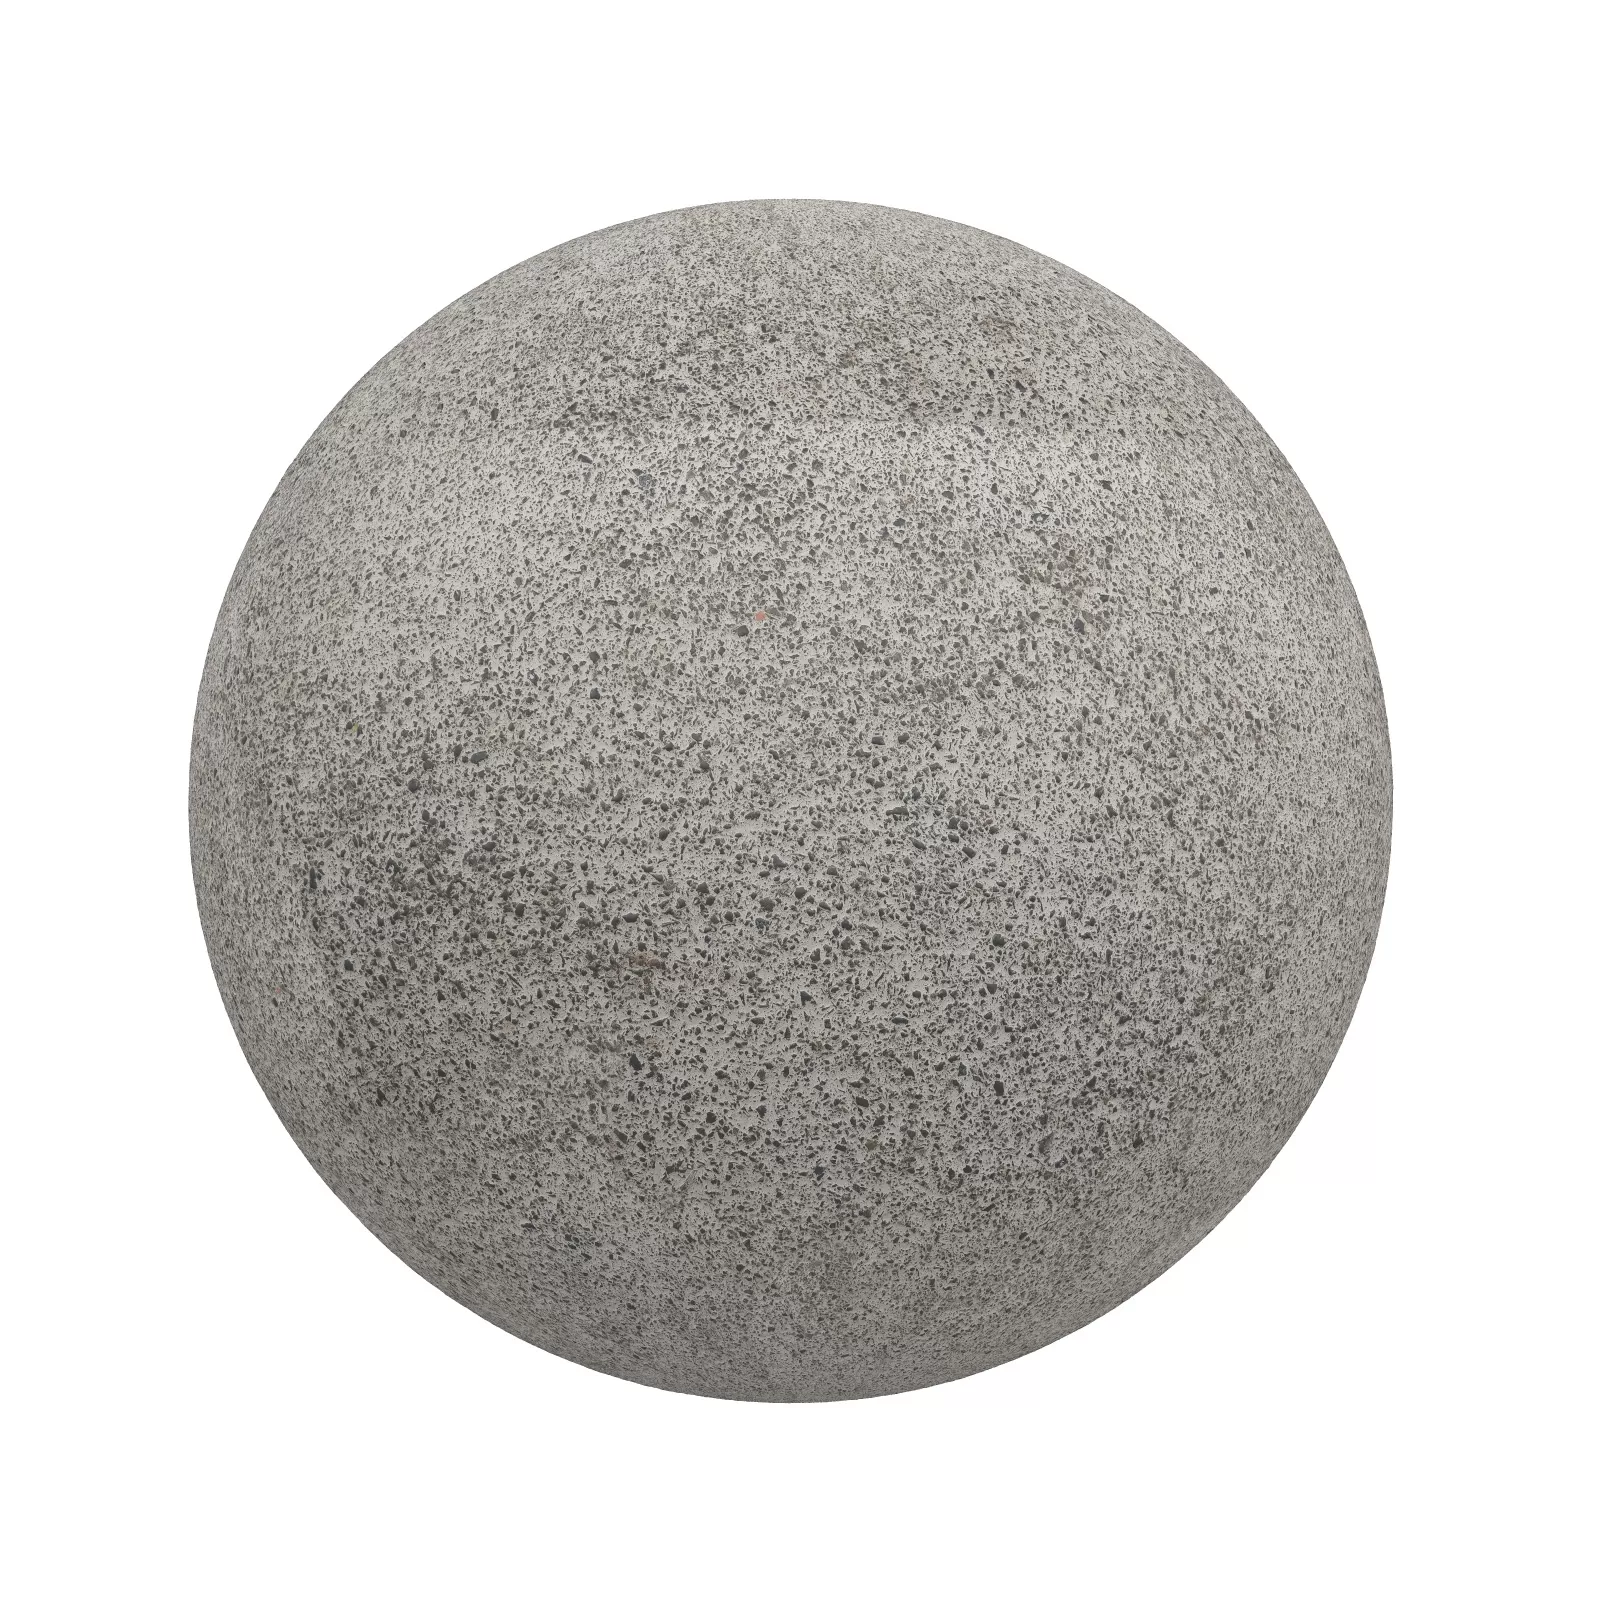 TEXTURES – STONES – CGAxis PBR Colection Vol 1 Stones – grey stone 3